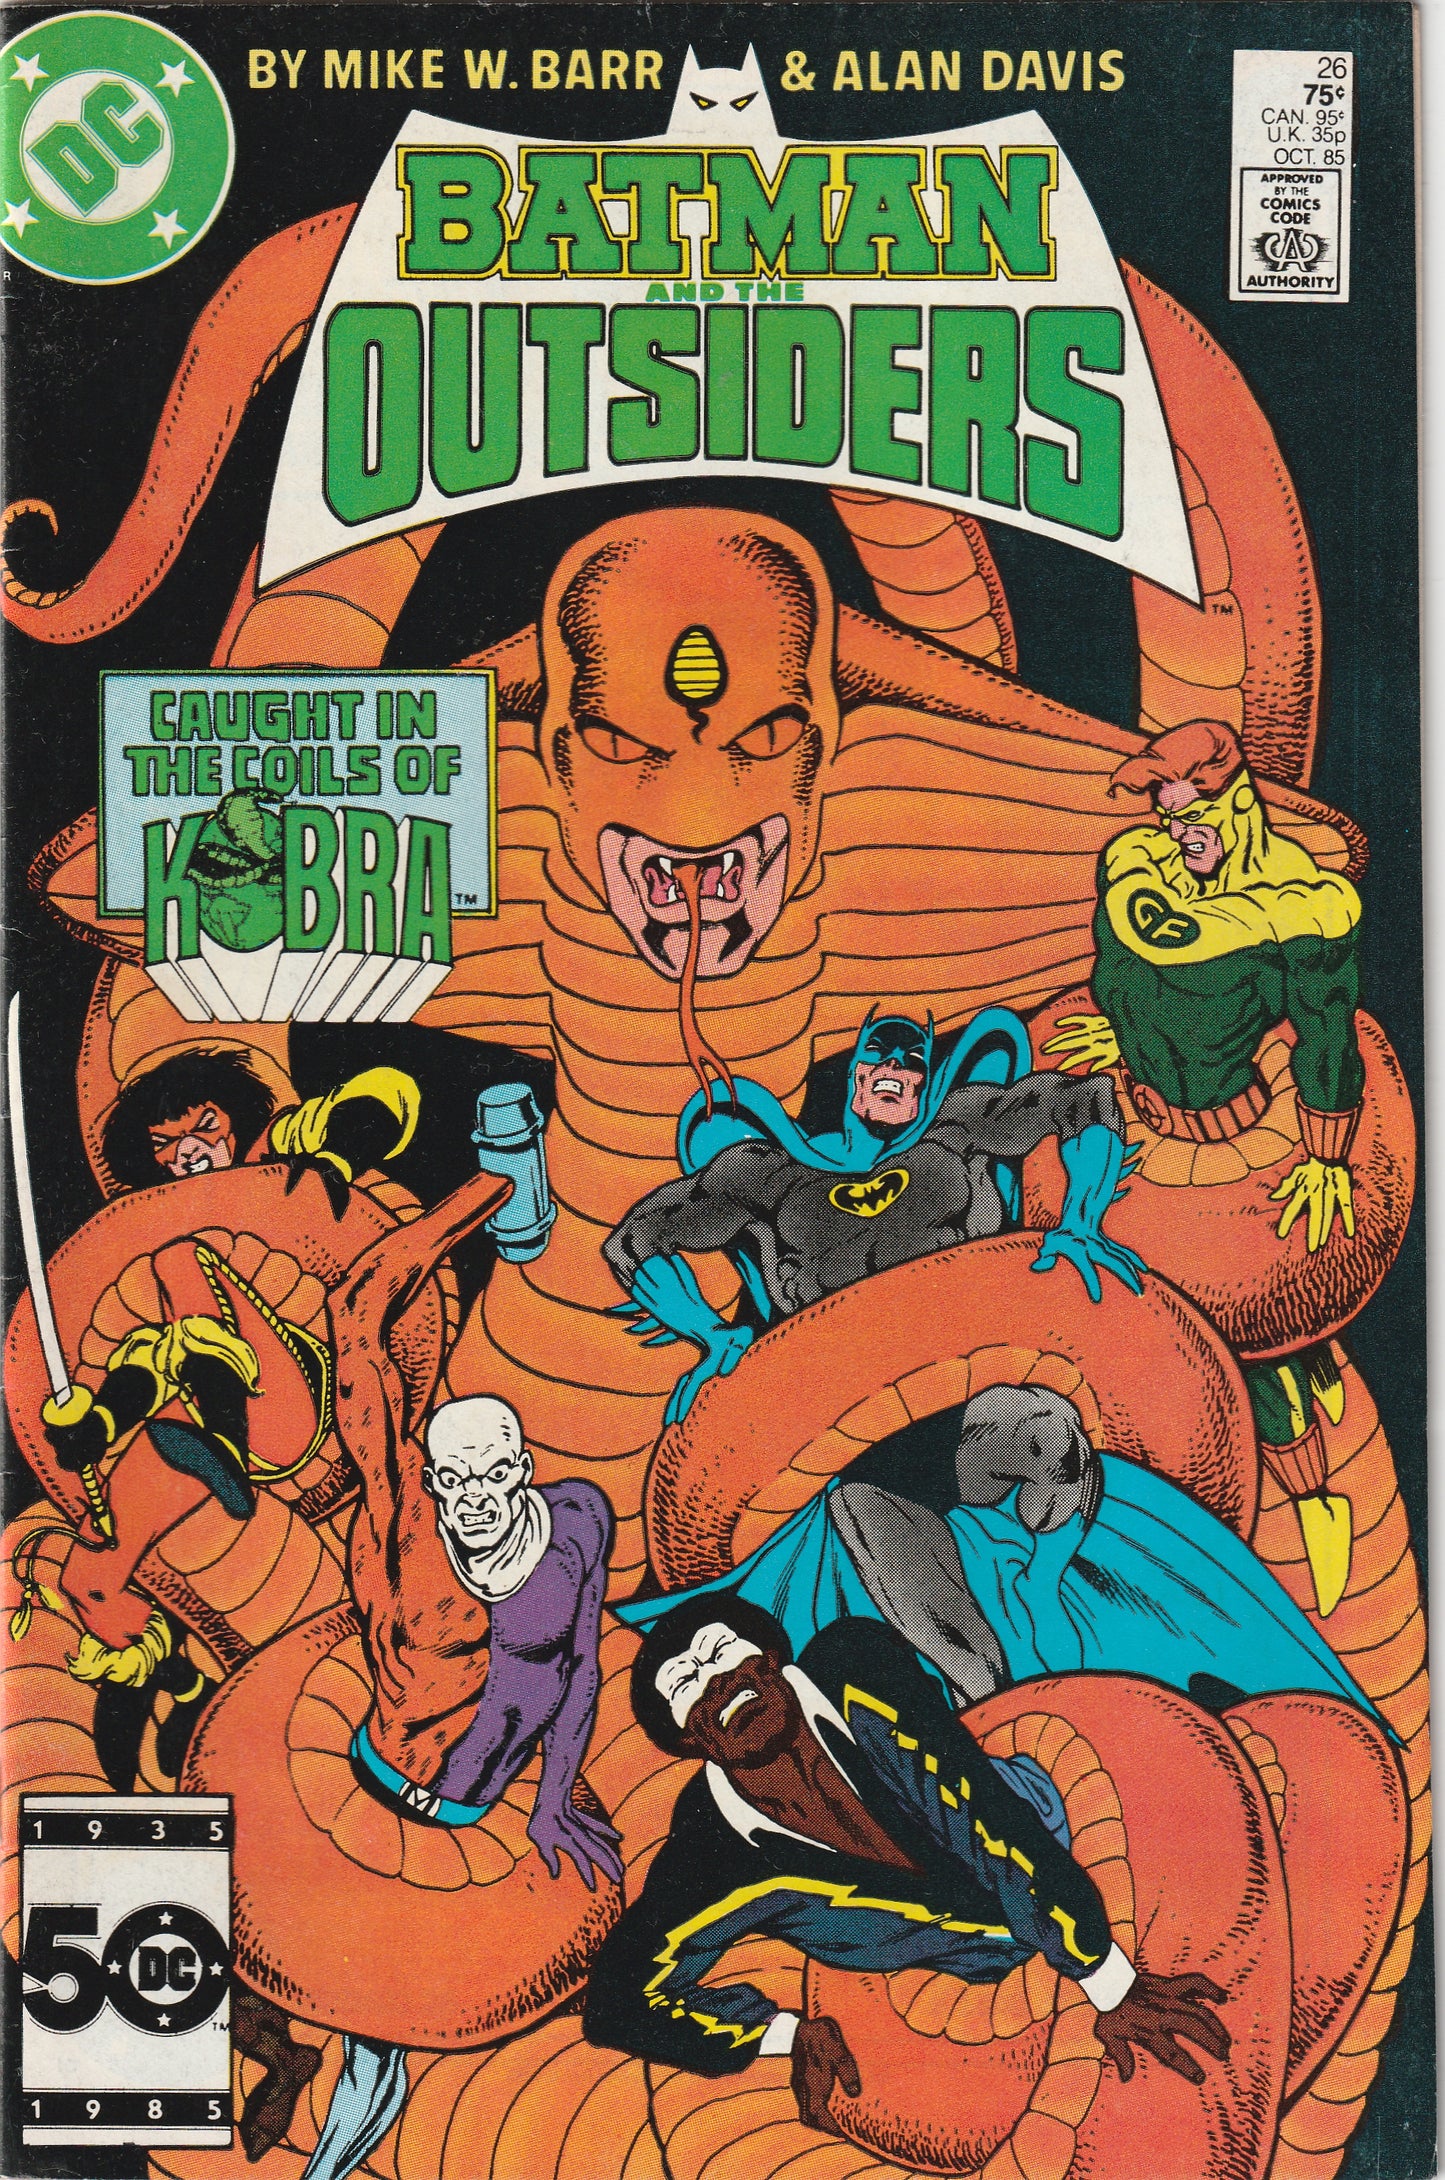 Batman And The Outsiders #26 (1985)